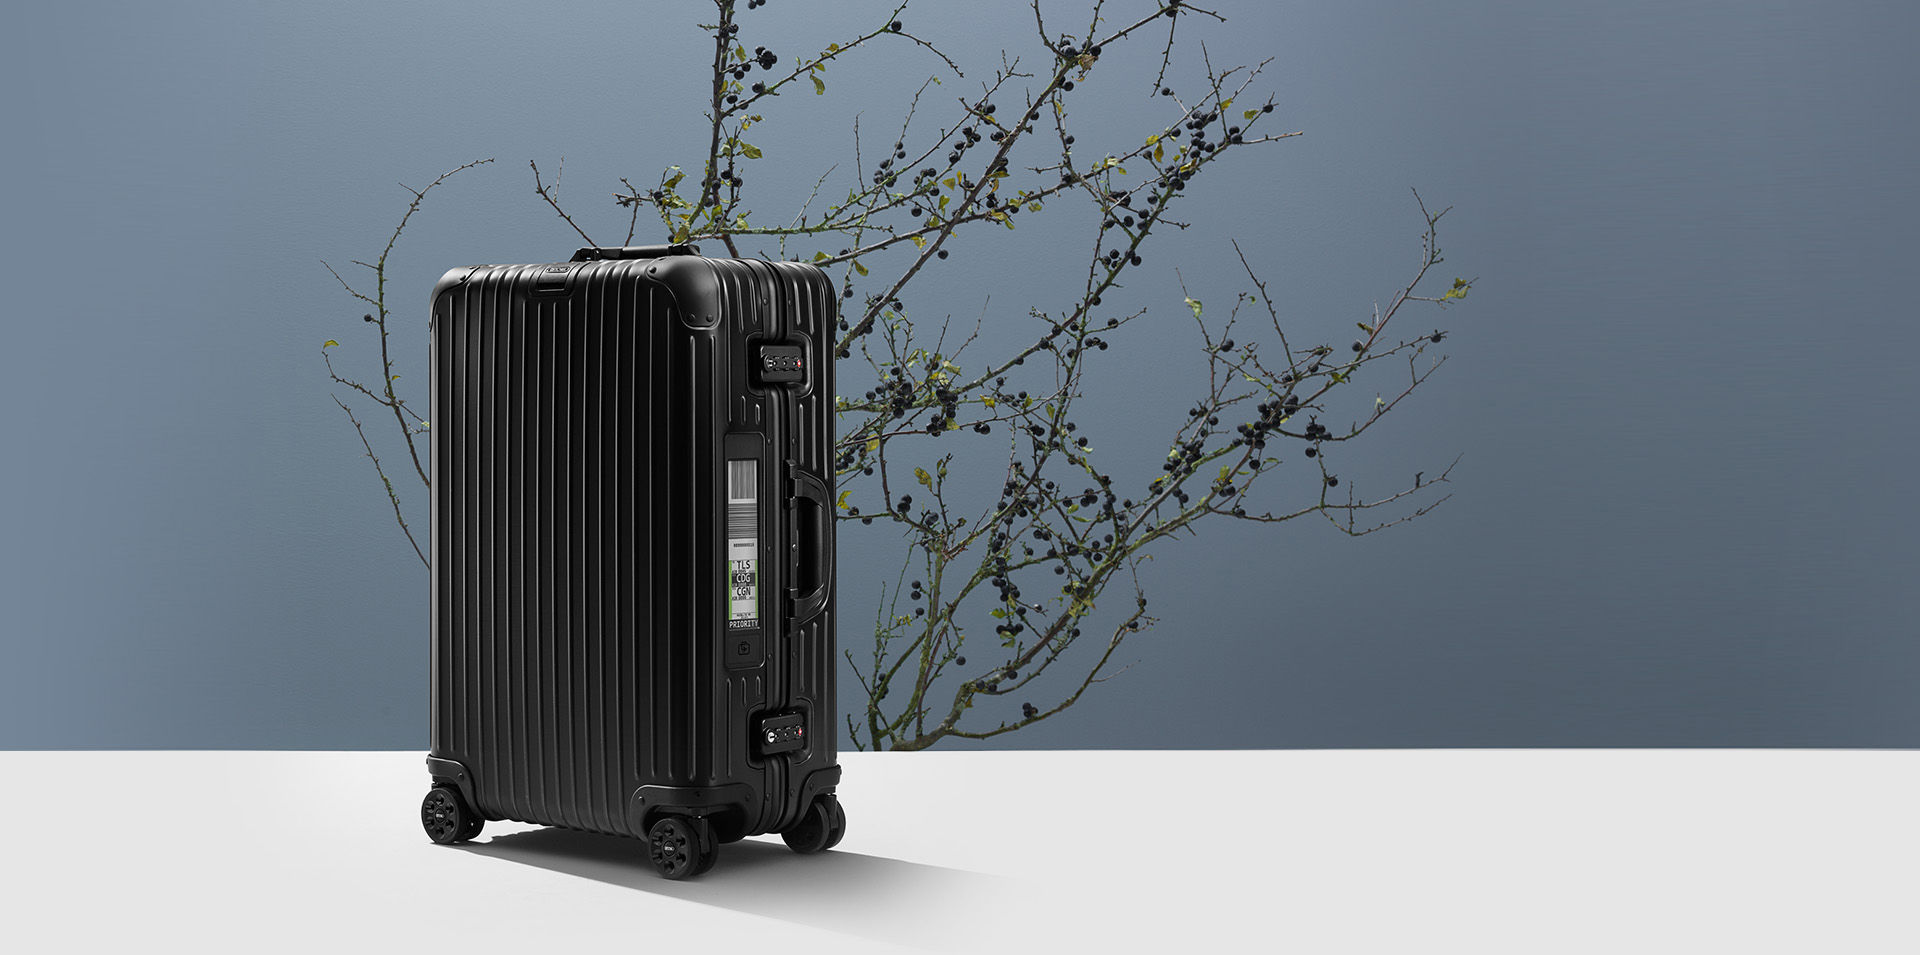 Rimowa Topas Review (Is It Worth The High Price?) ⋆ Expert World Travel